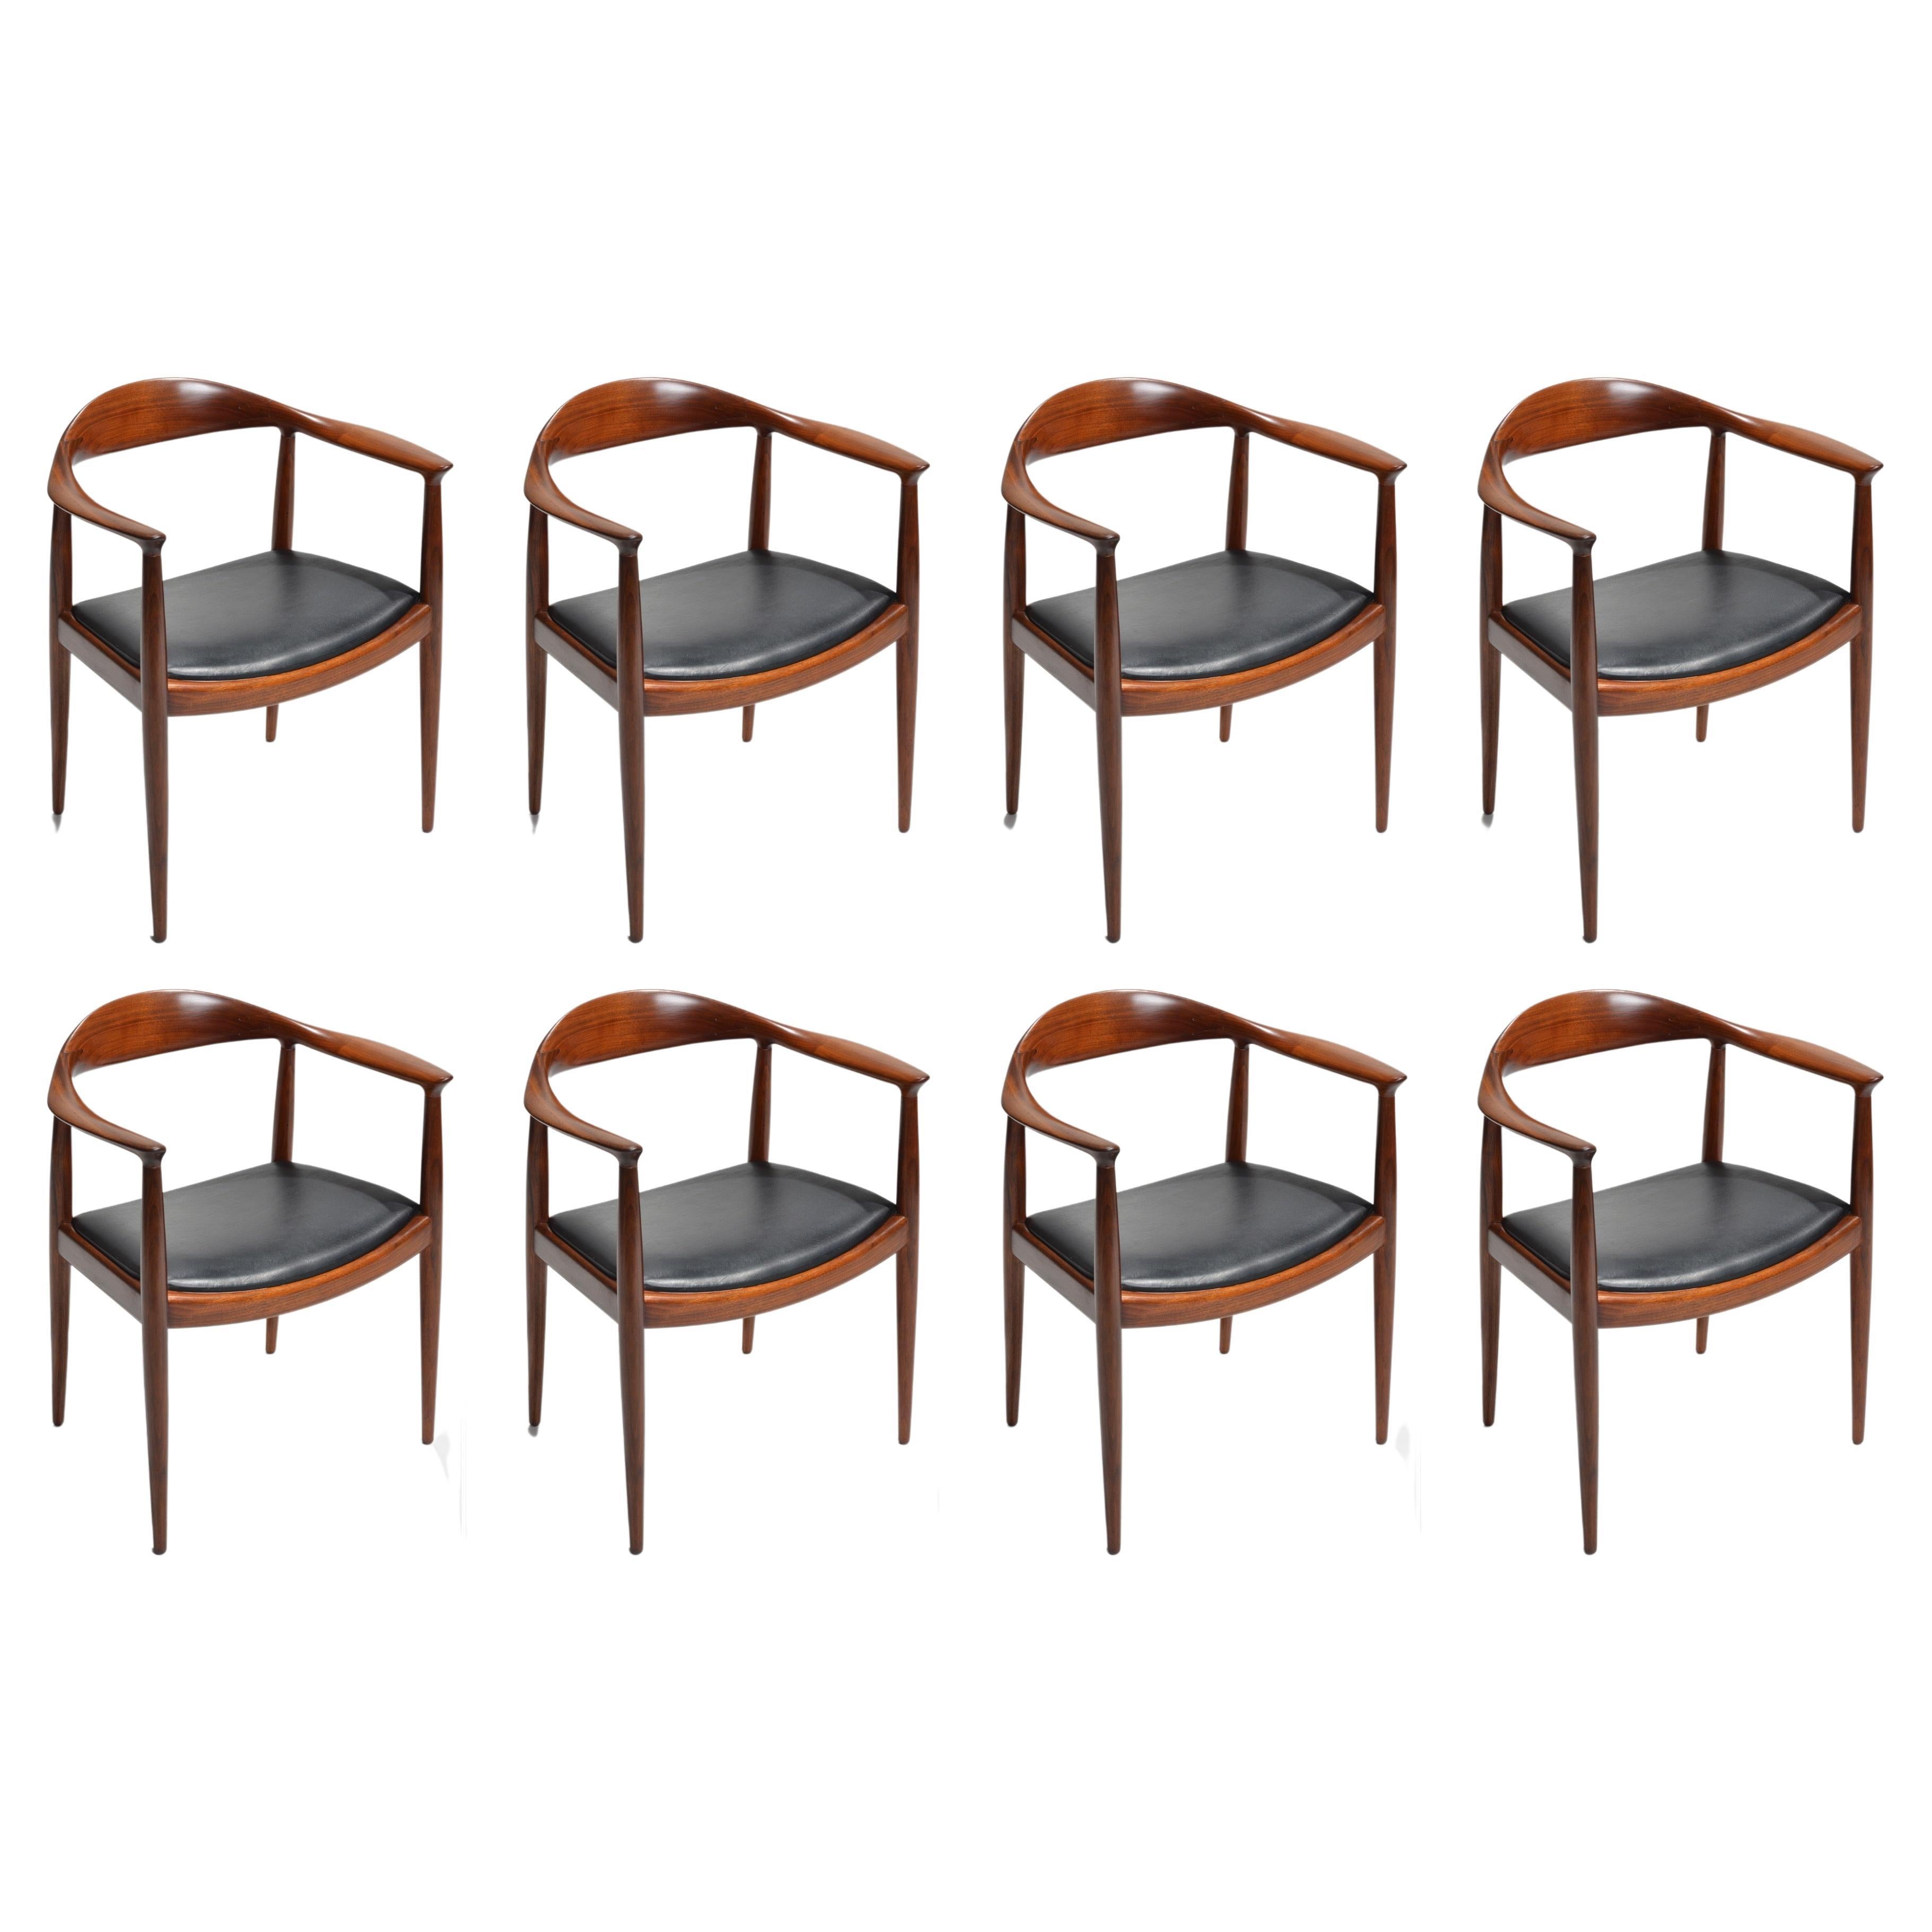  8 Hans Wegner for Johannes Hansen JH-503 Chairs in Walnut and Leather